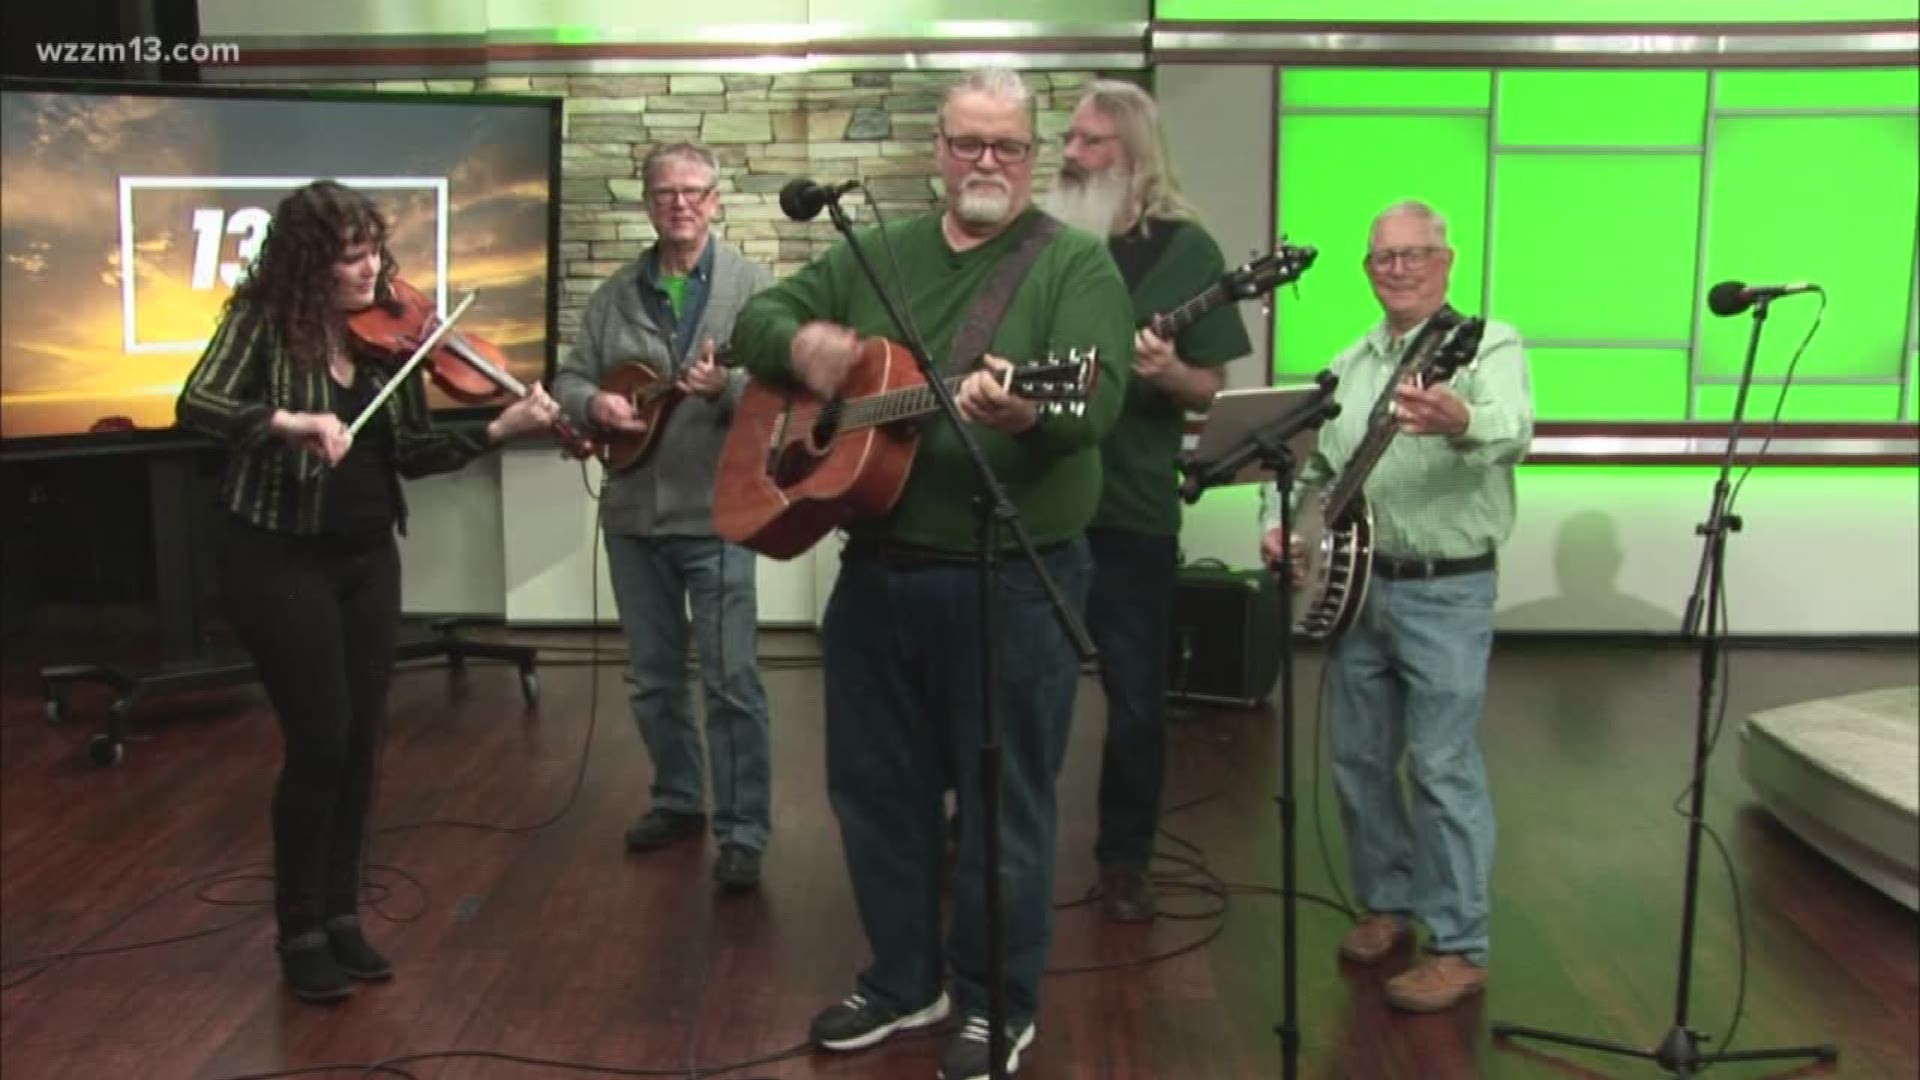 To celebrate St. Patrick's Day we invited the Conklin Ceili Band to the station